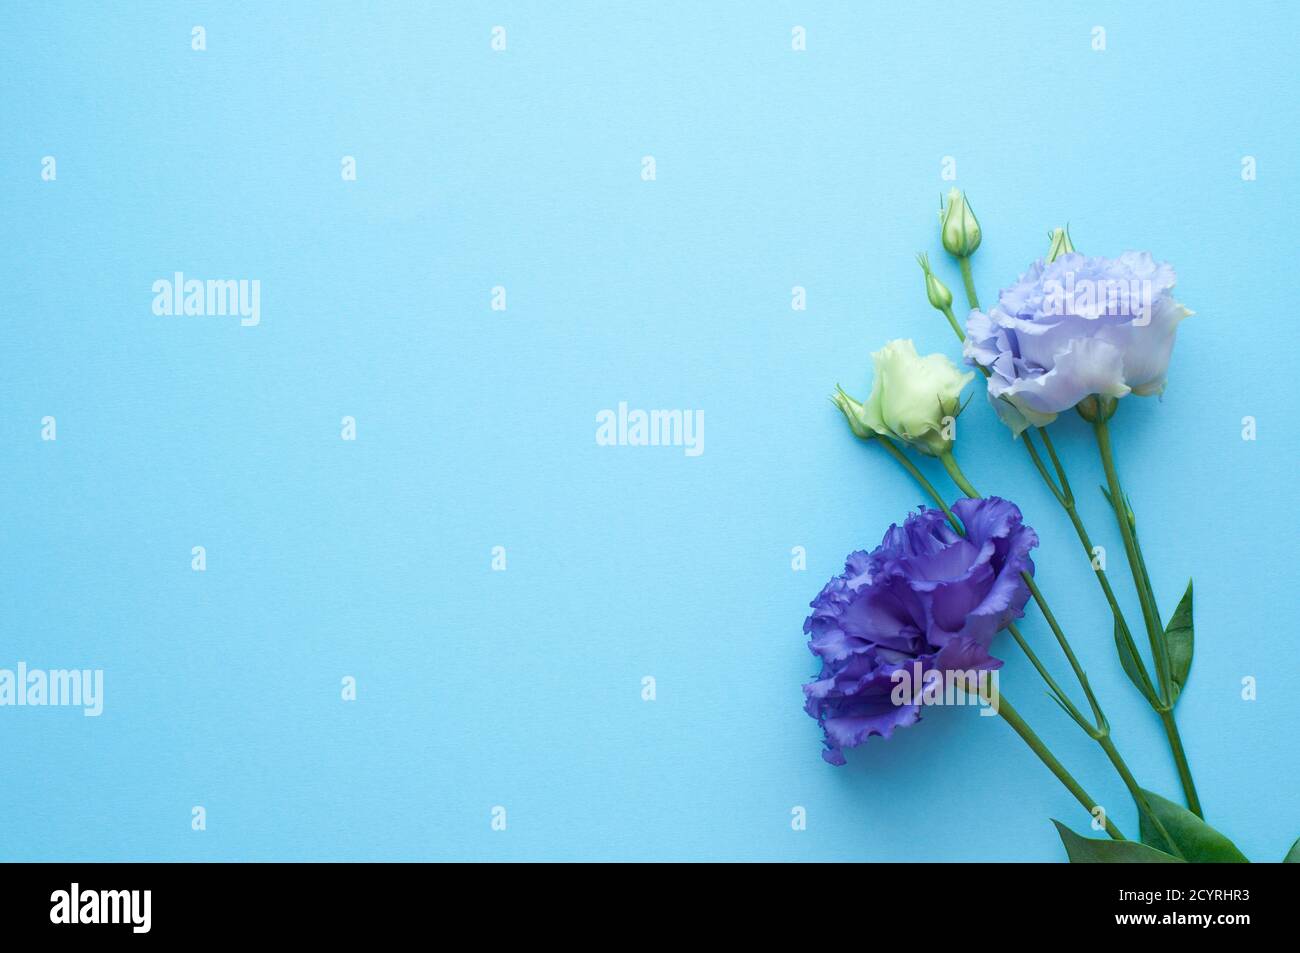 Beautiful purple and blue eustoma flowers (lisianthus) in full bloom with green leaves. Bouquet of flowers on a blue background. Stock Photo